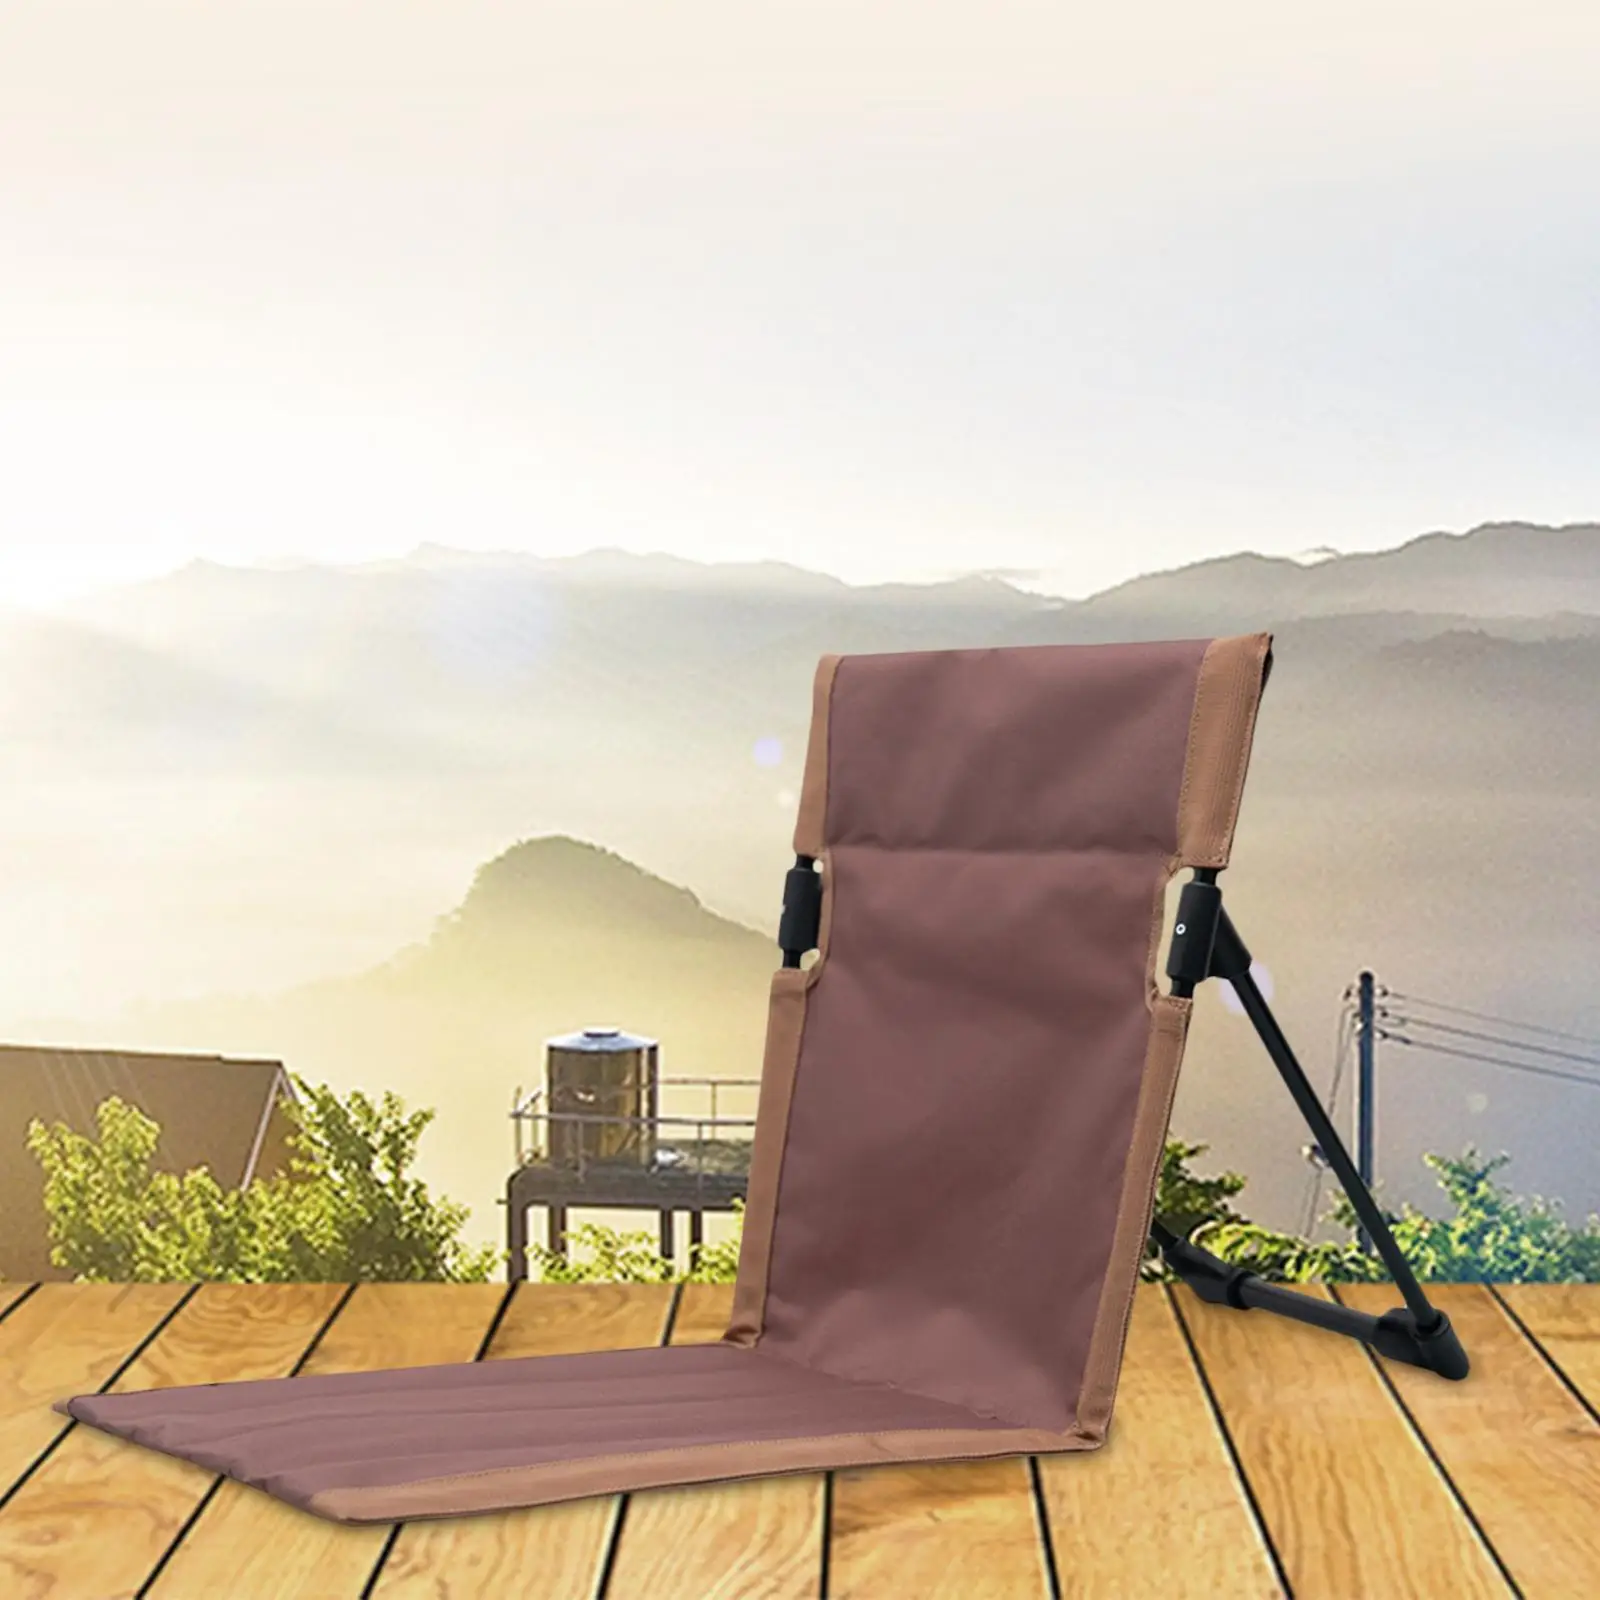 Backrest Pad Cushion Foldable Sit Mat Camping Accessory for Camping Trekking